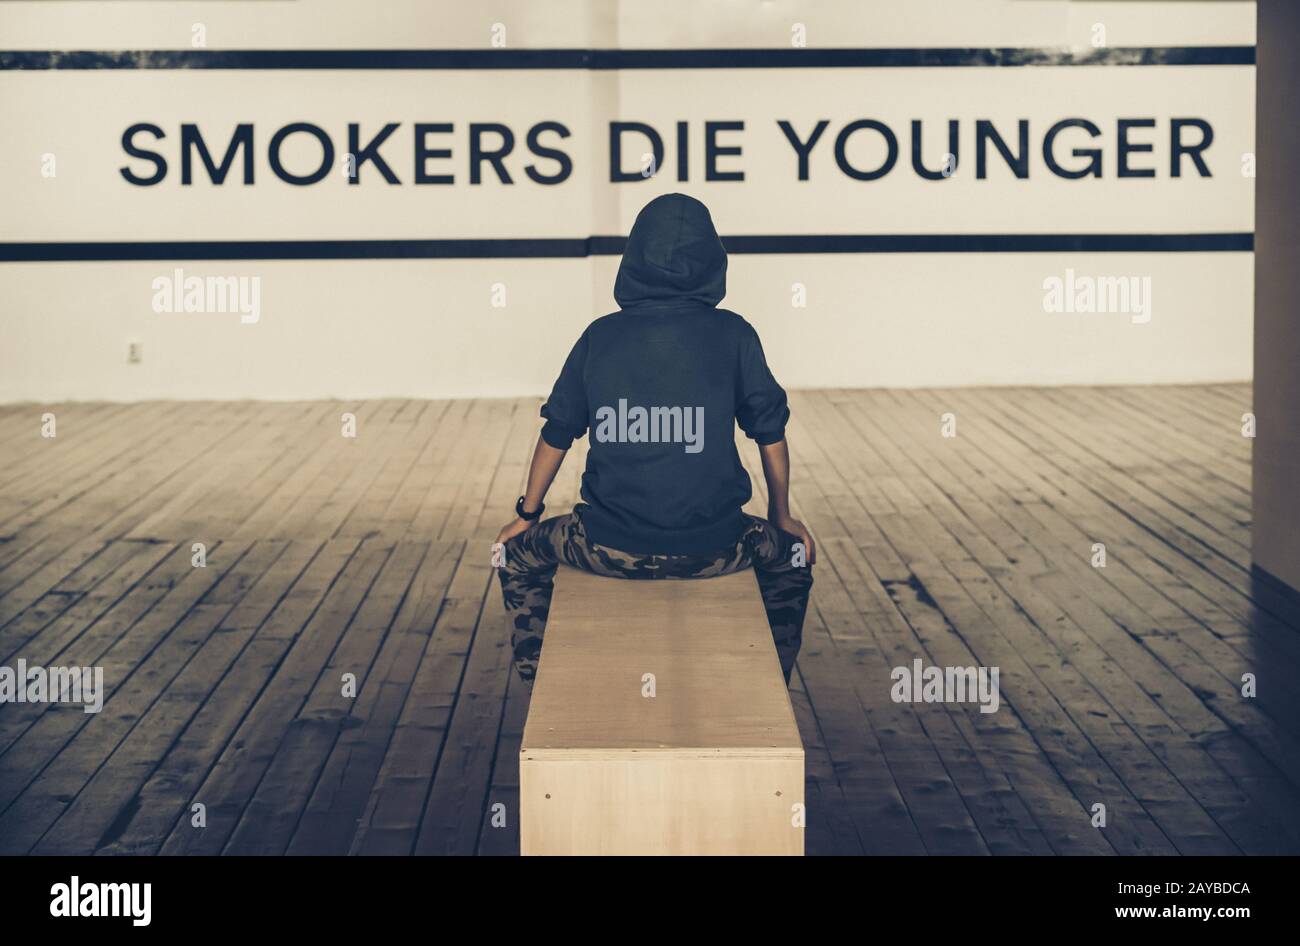 Teenager smoking and message on wall - Smokers die younger. No smoking  concept Stock Photo - Alamy